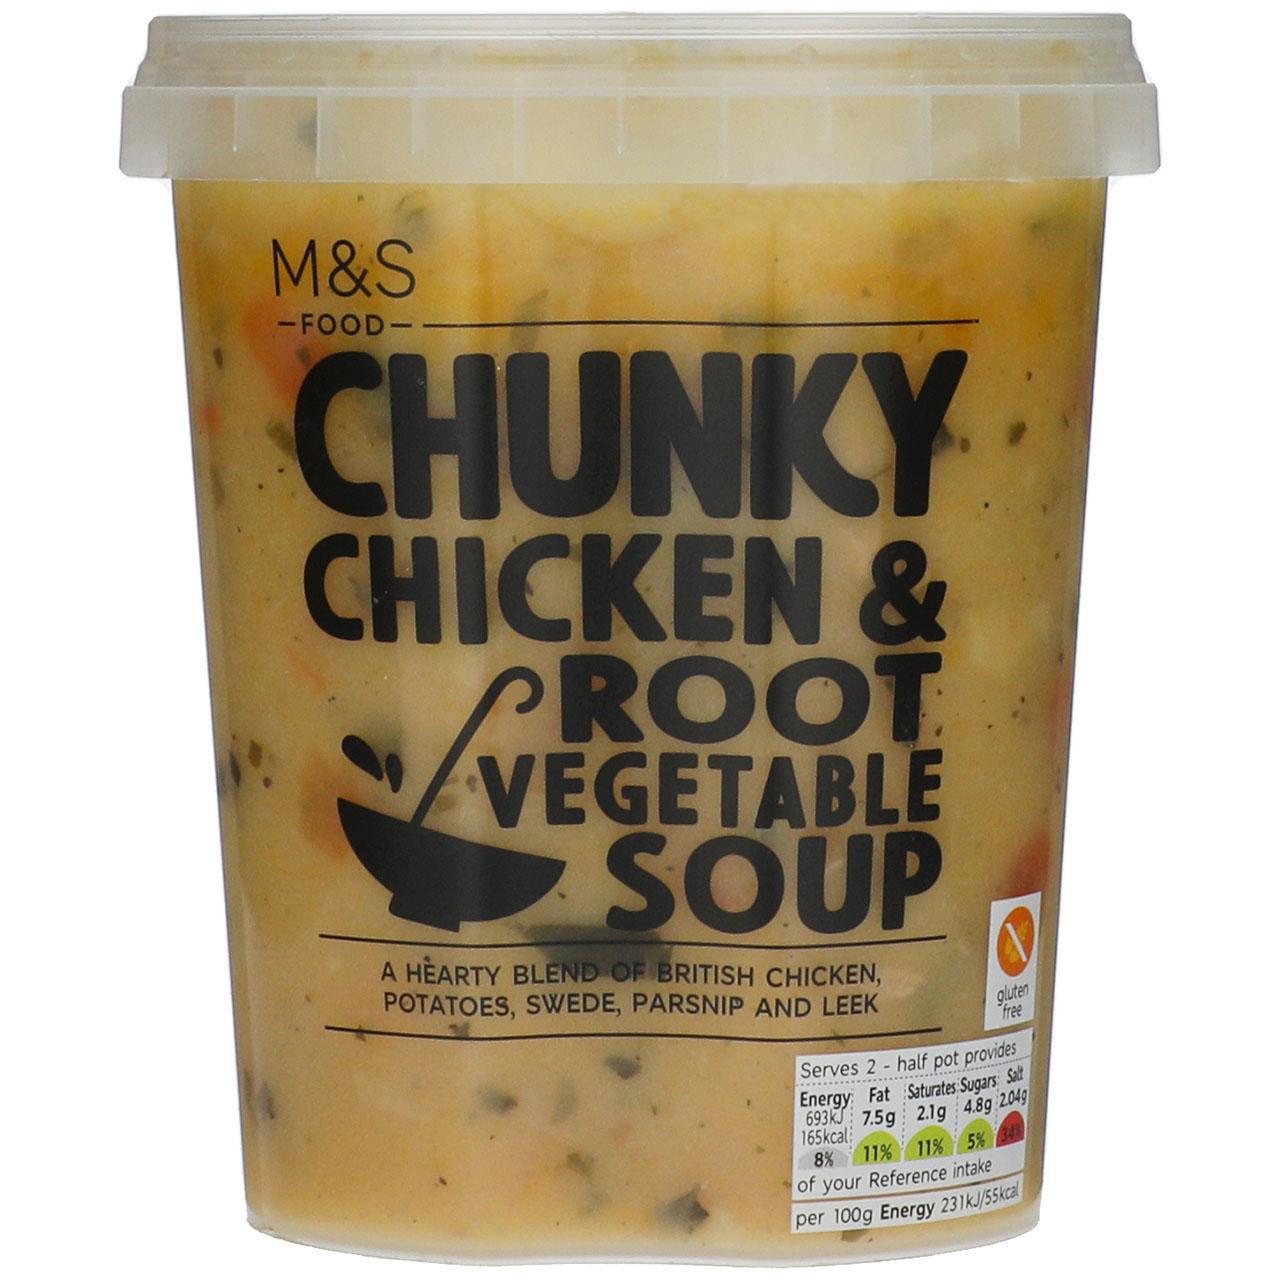 M&S Chunky Chicken & Root Vegetable Soup 600g